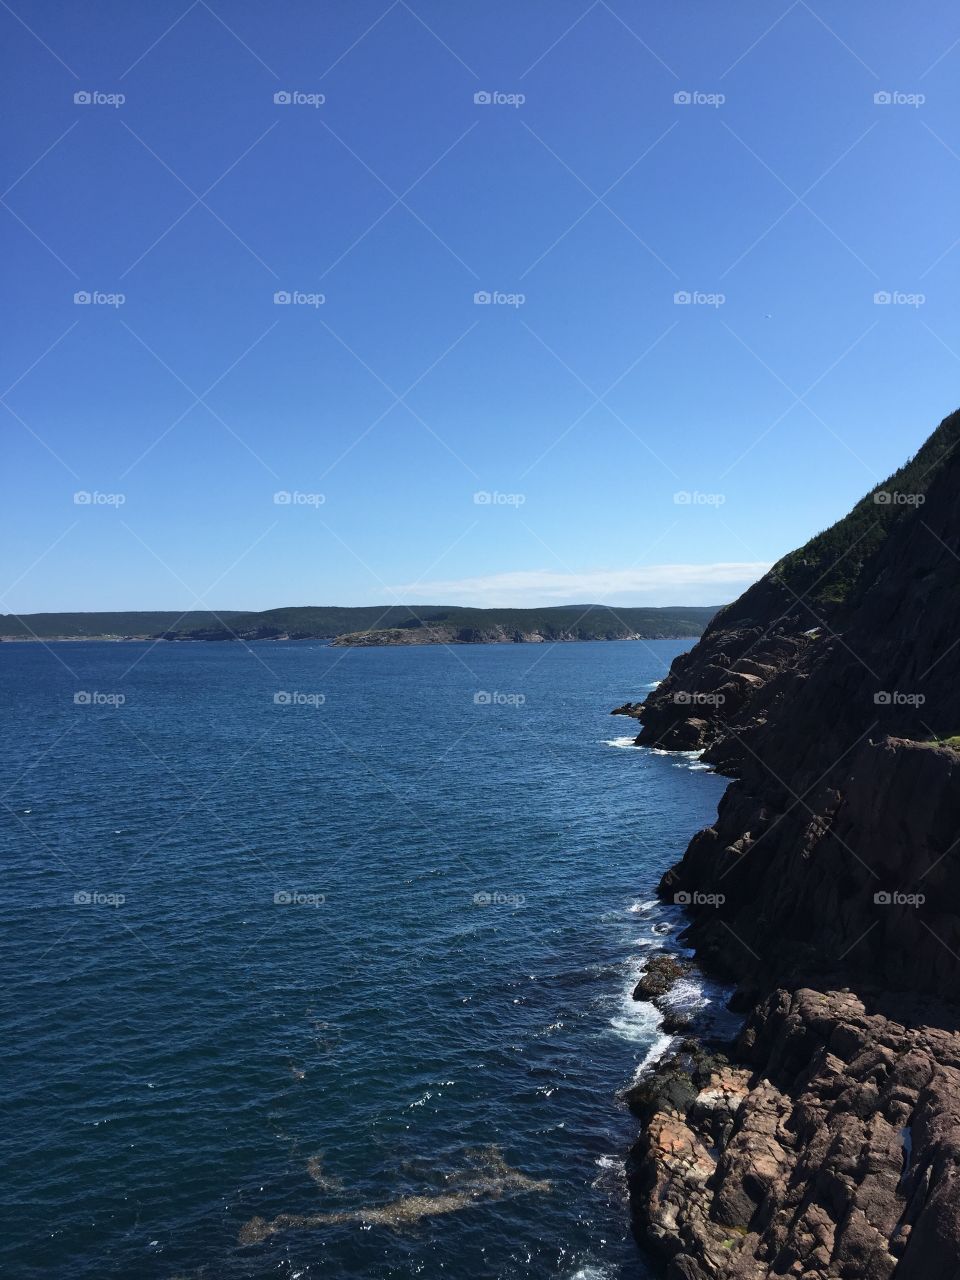 Newfoundland coastline at Fort Amherst just outside St. John's, NL with Cape Spear in the distance. 